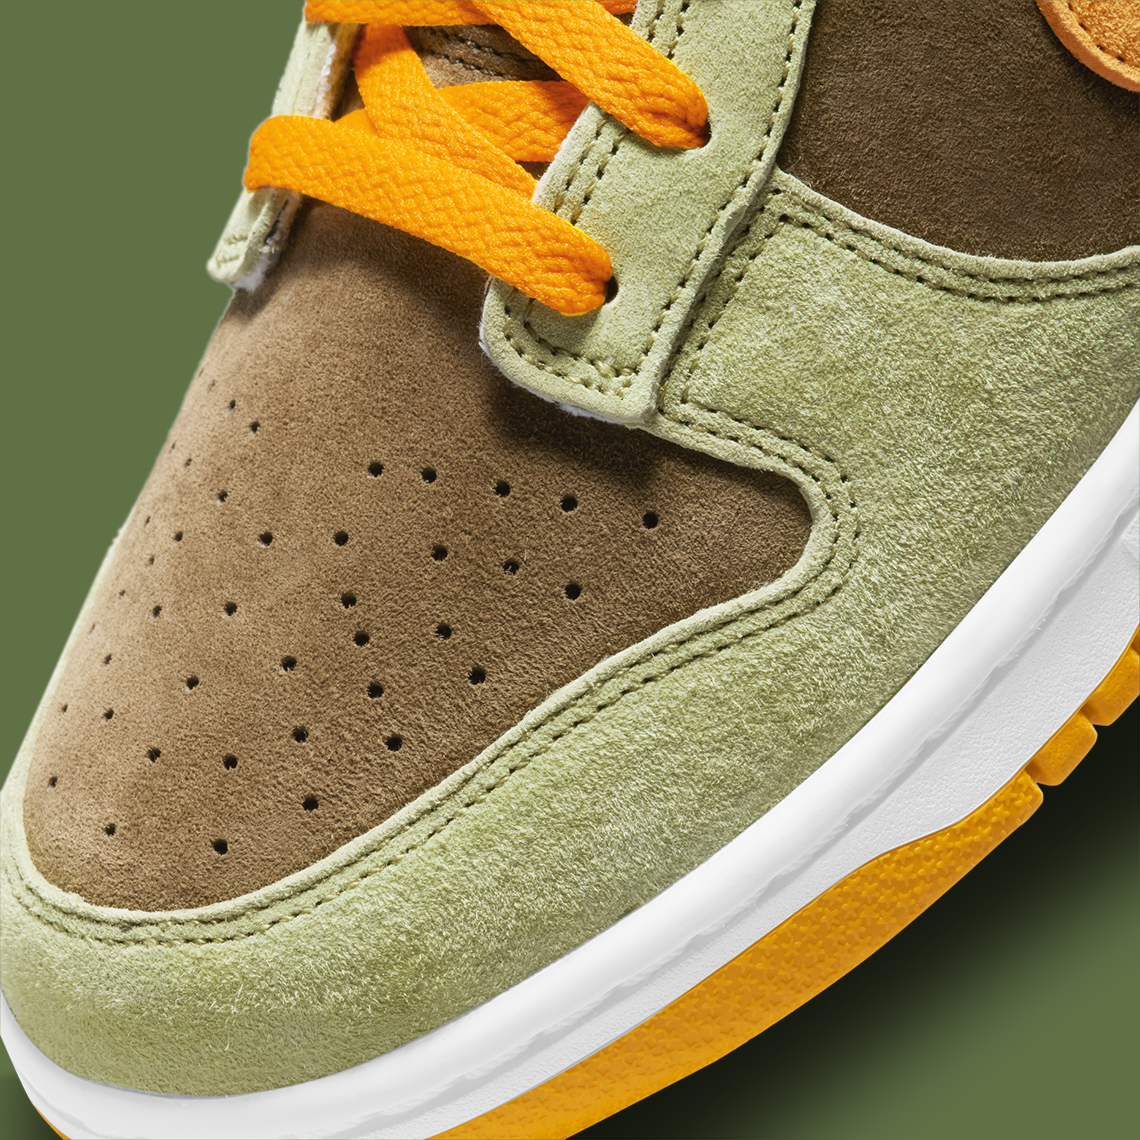 nike dunk low dusty olive DH5360 300 7